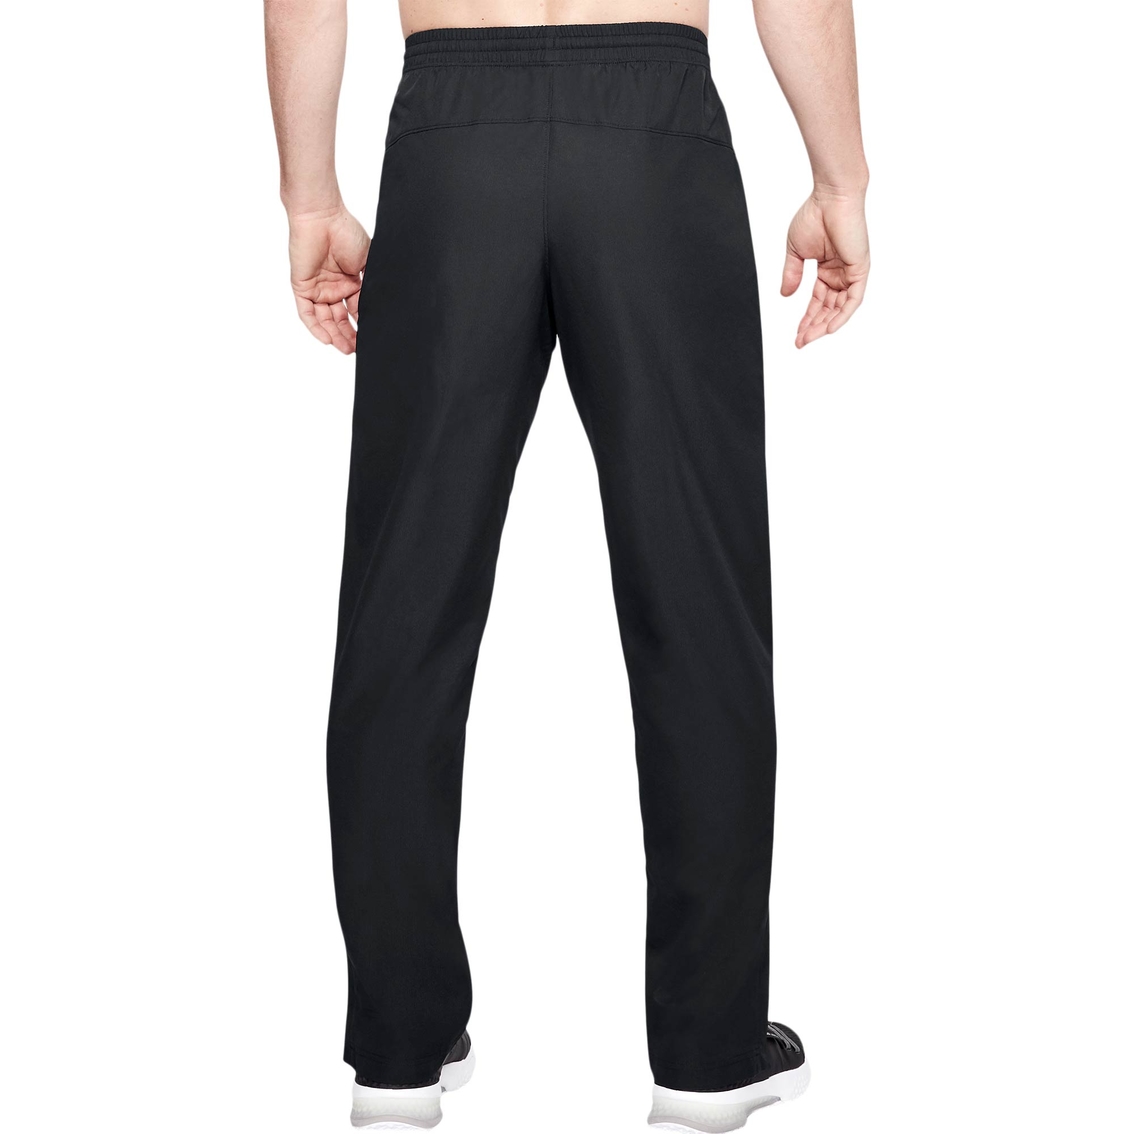 Under Armour Sportstyle Woven Pants - Image 2 of 2